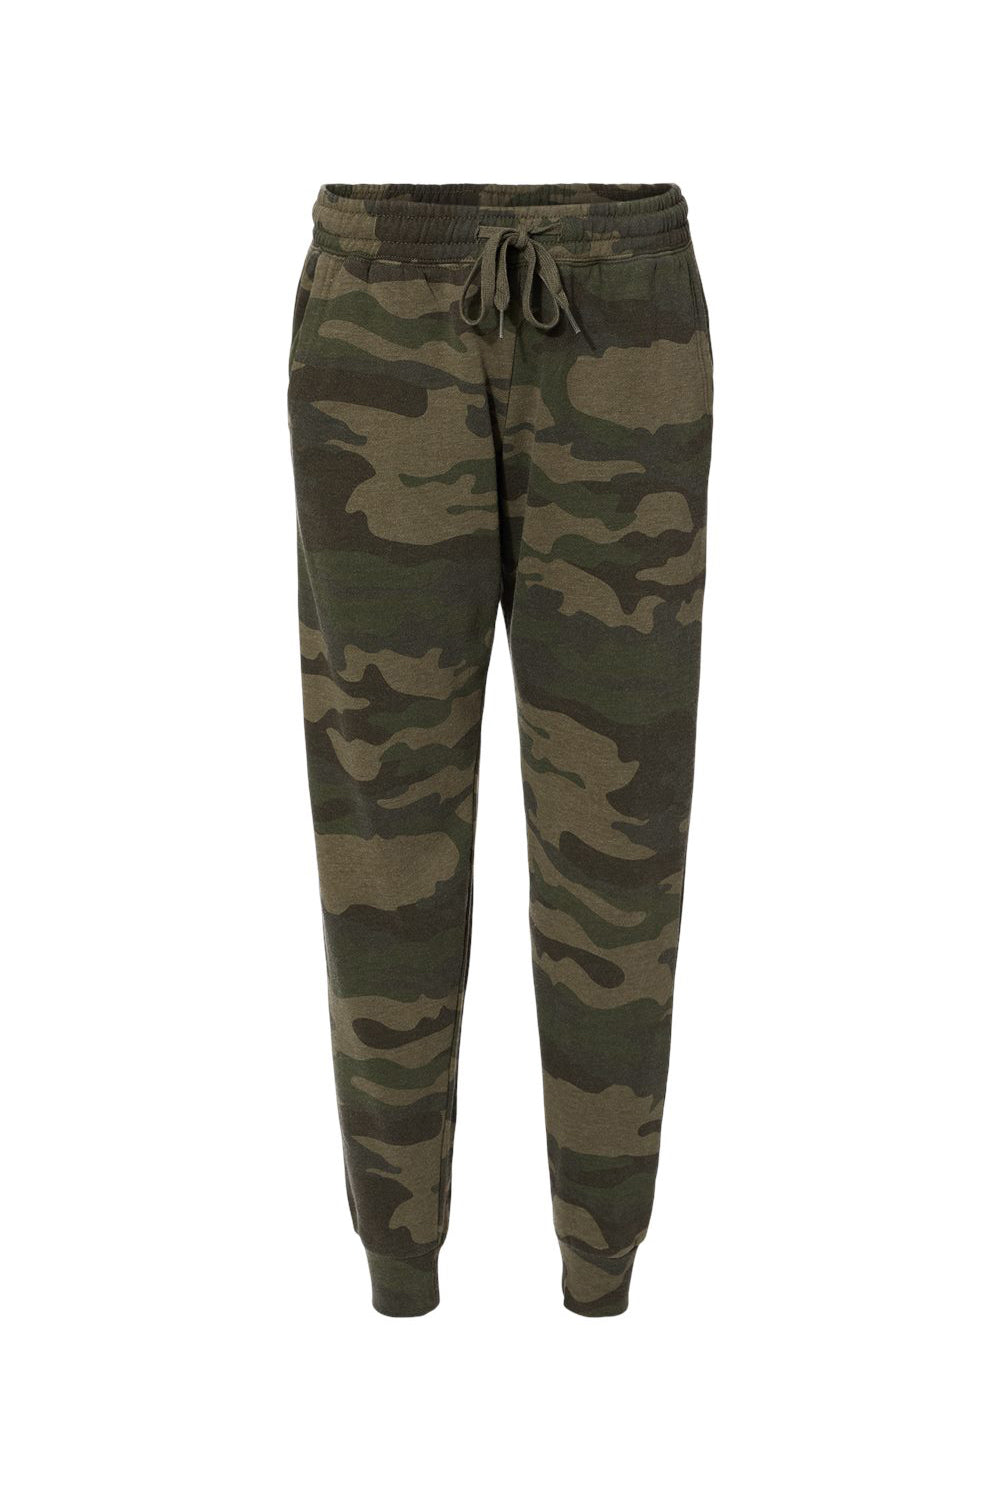 Independent Trading Co. PRM20PNT Womens California Wave Wash Sweatpants w/ Pockets Heather Forest Green Camo Flat Front